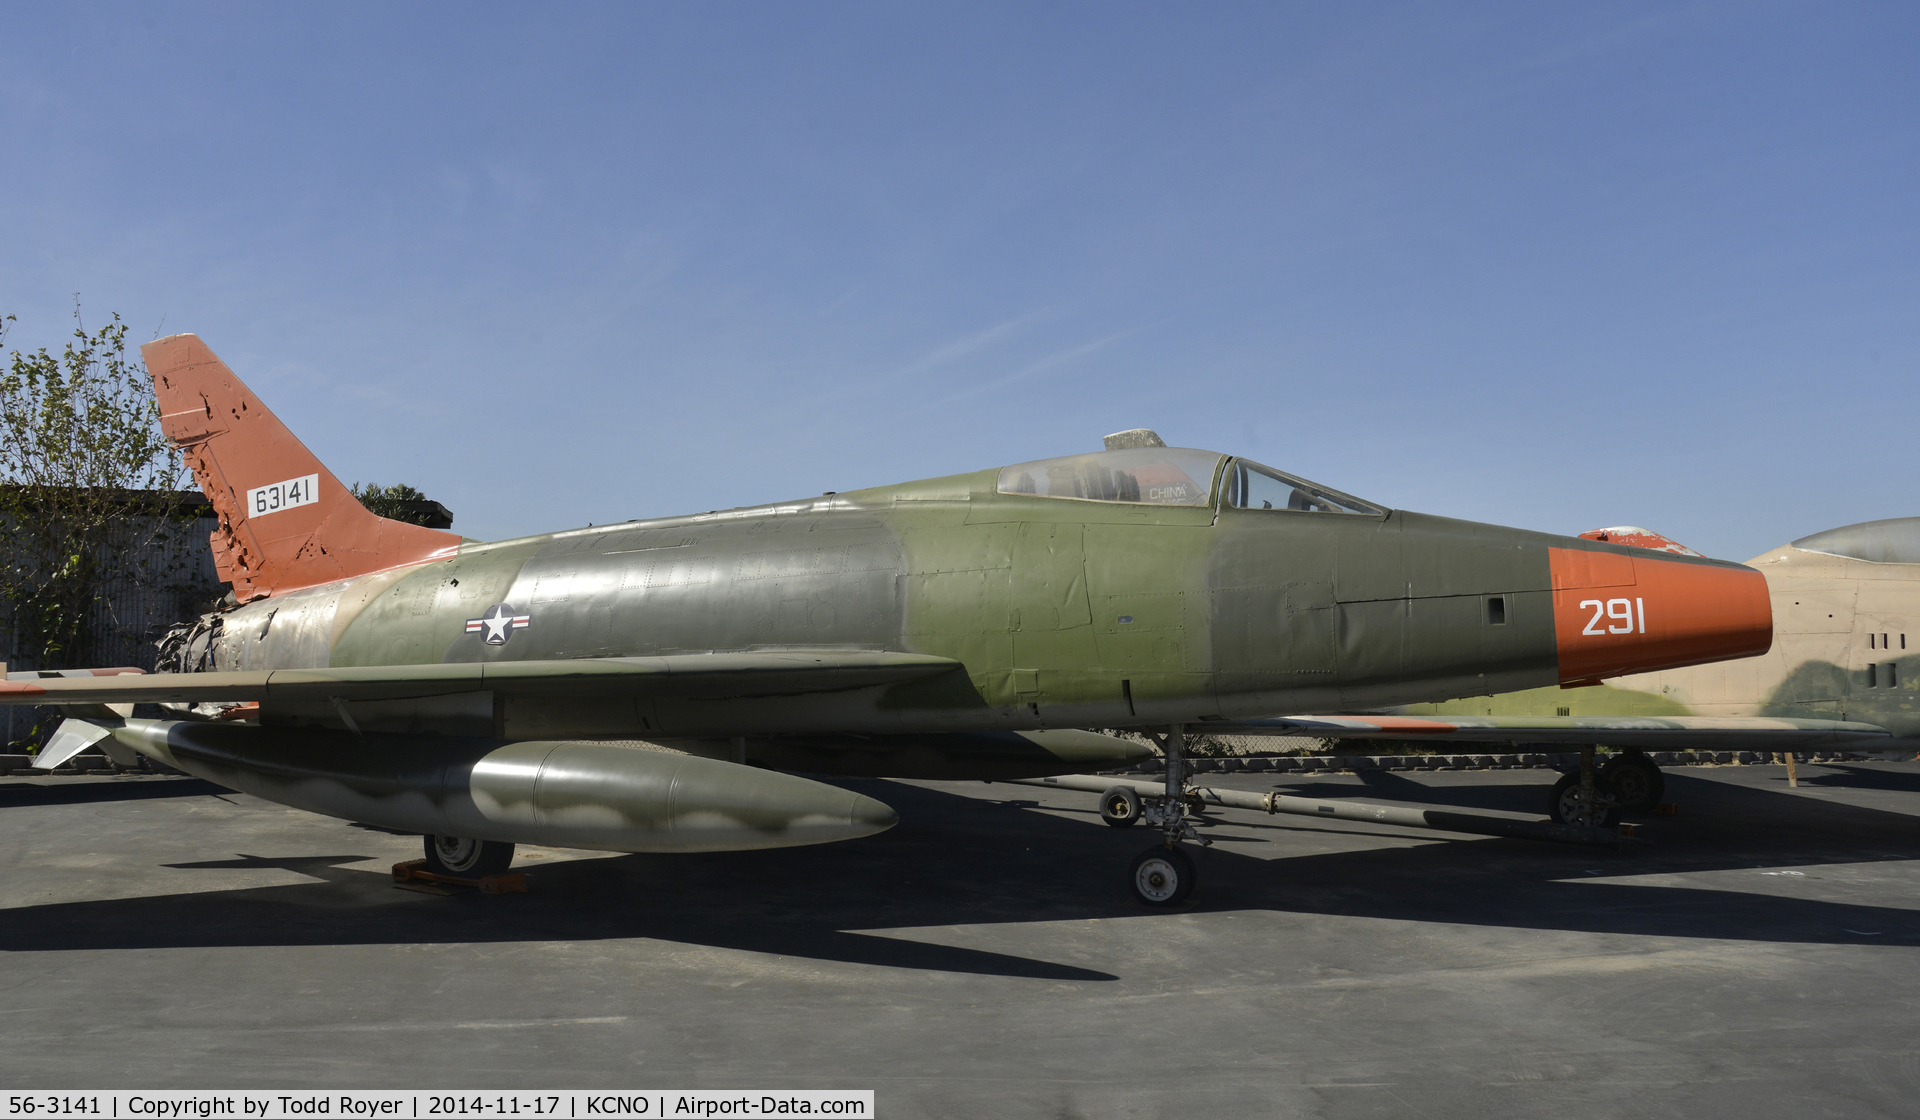 56-3141, 1956 North American F-100D Super Sabre C/N 235-239, On display at the Planes of Fame Chino location